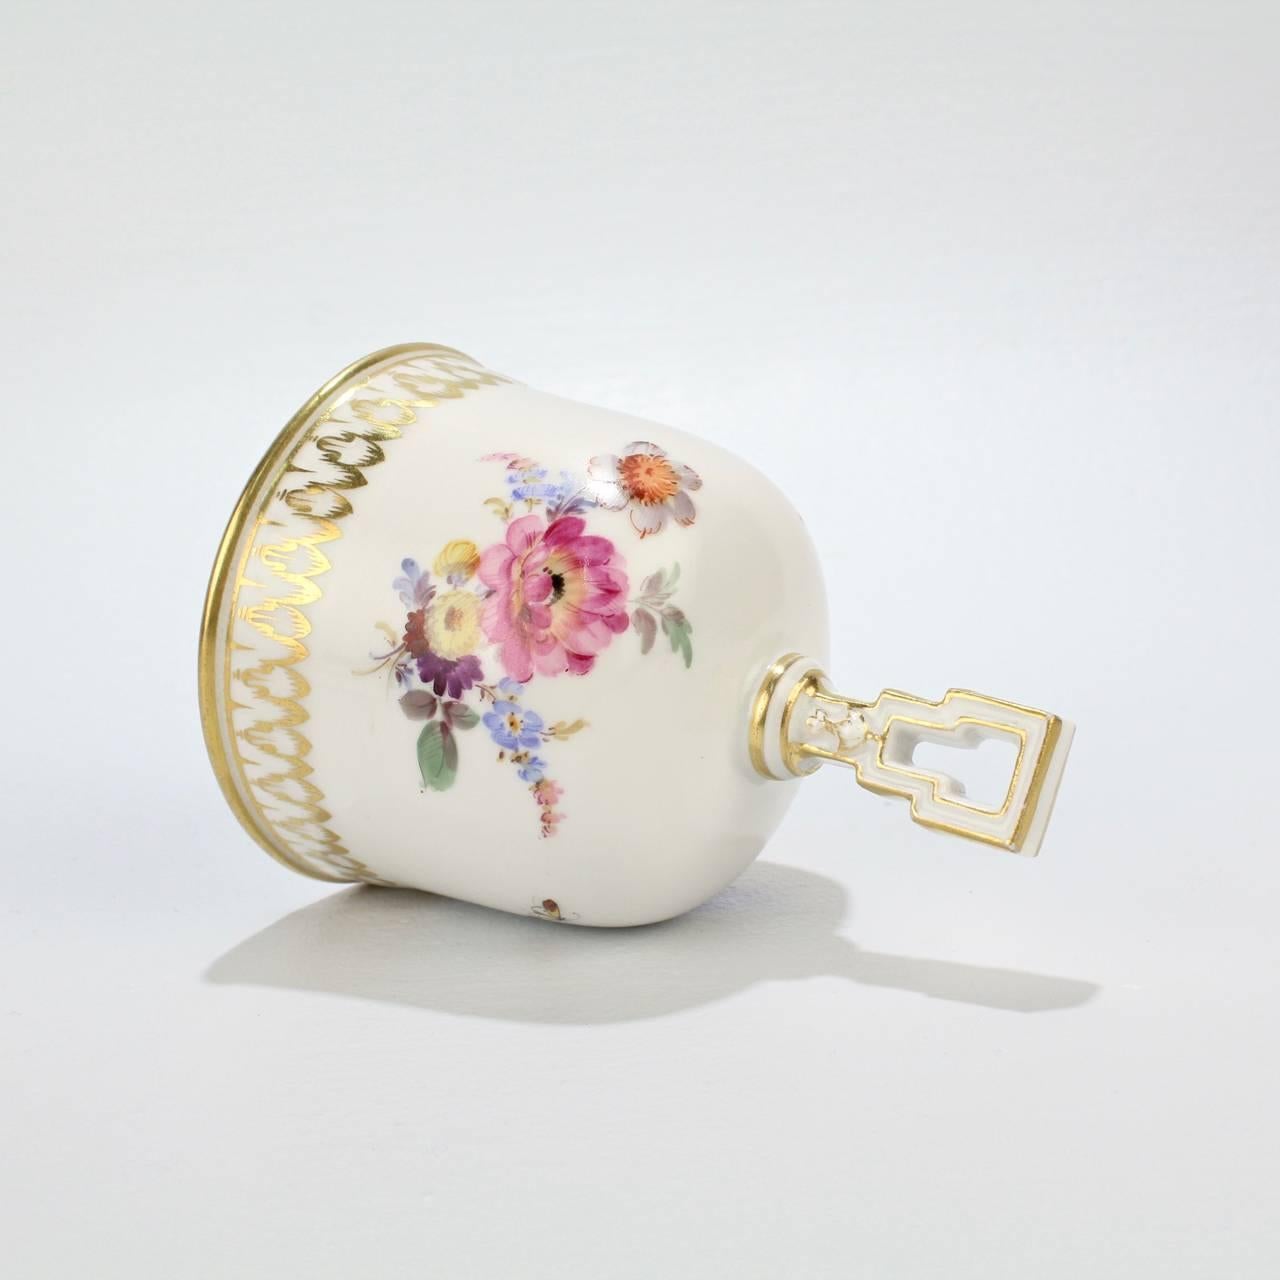 20th Century Meissen Porcelain Table Bell with Hand-Painted Dresden Flowers Decoration